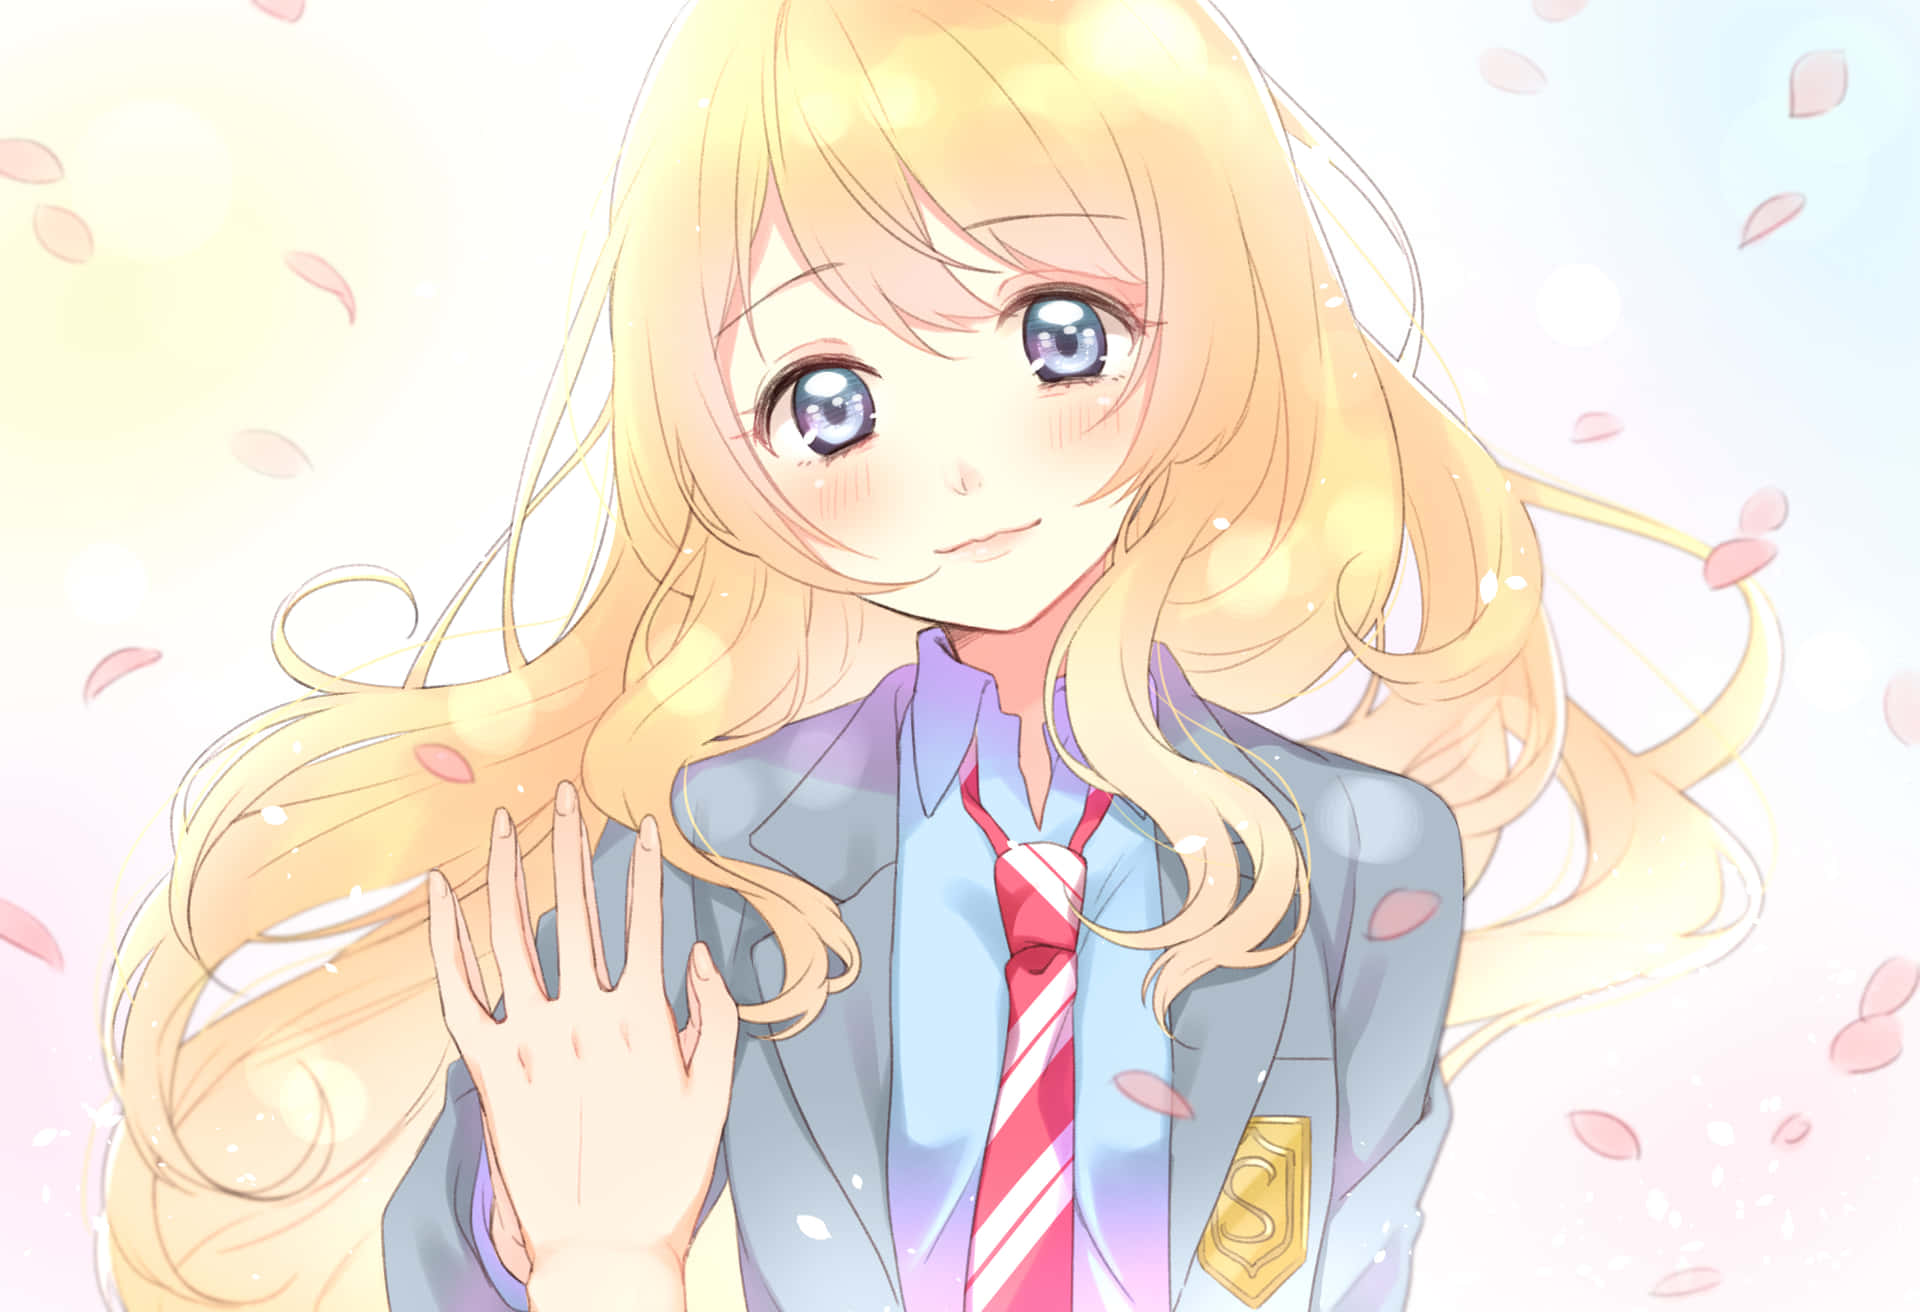 Kaori and Kosei fall in love through music in the hit anime series Your Lie In April